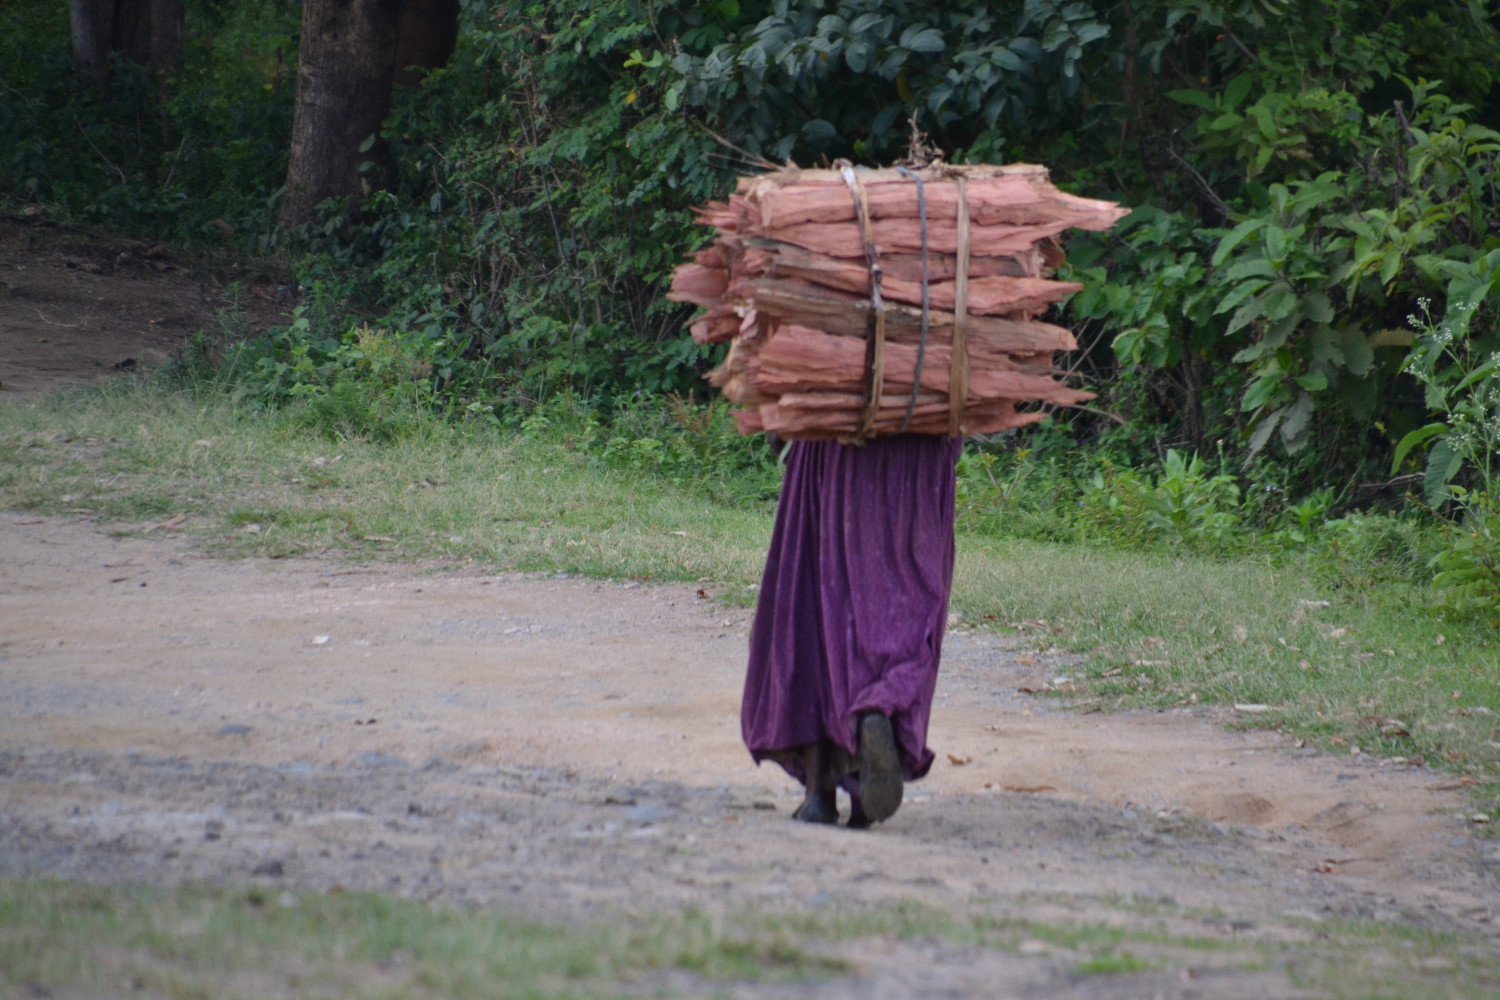 Women walk for up to 4 hours, 3 times a week in search of firewood. Deforestation is making it more difficult to find close to home.